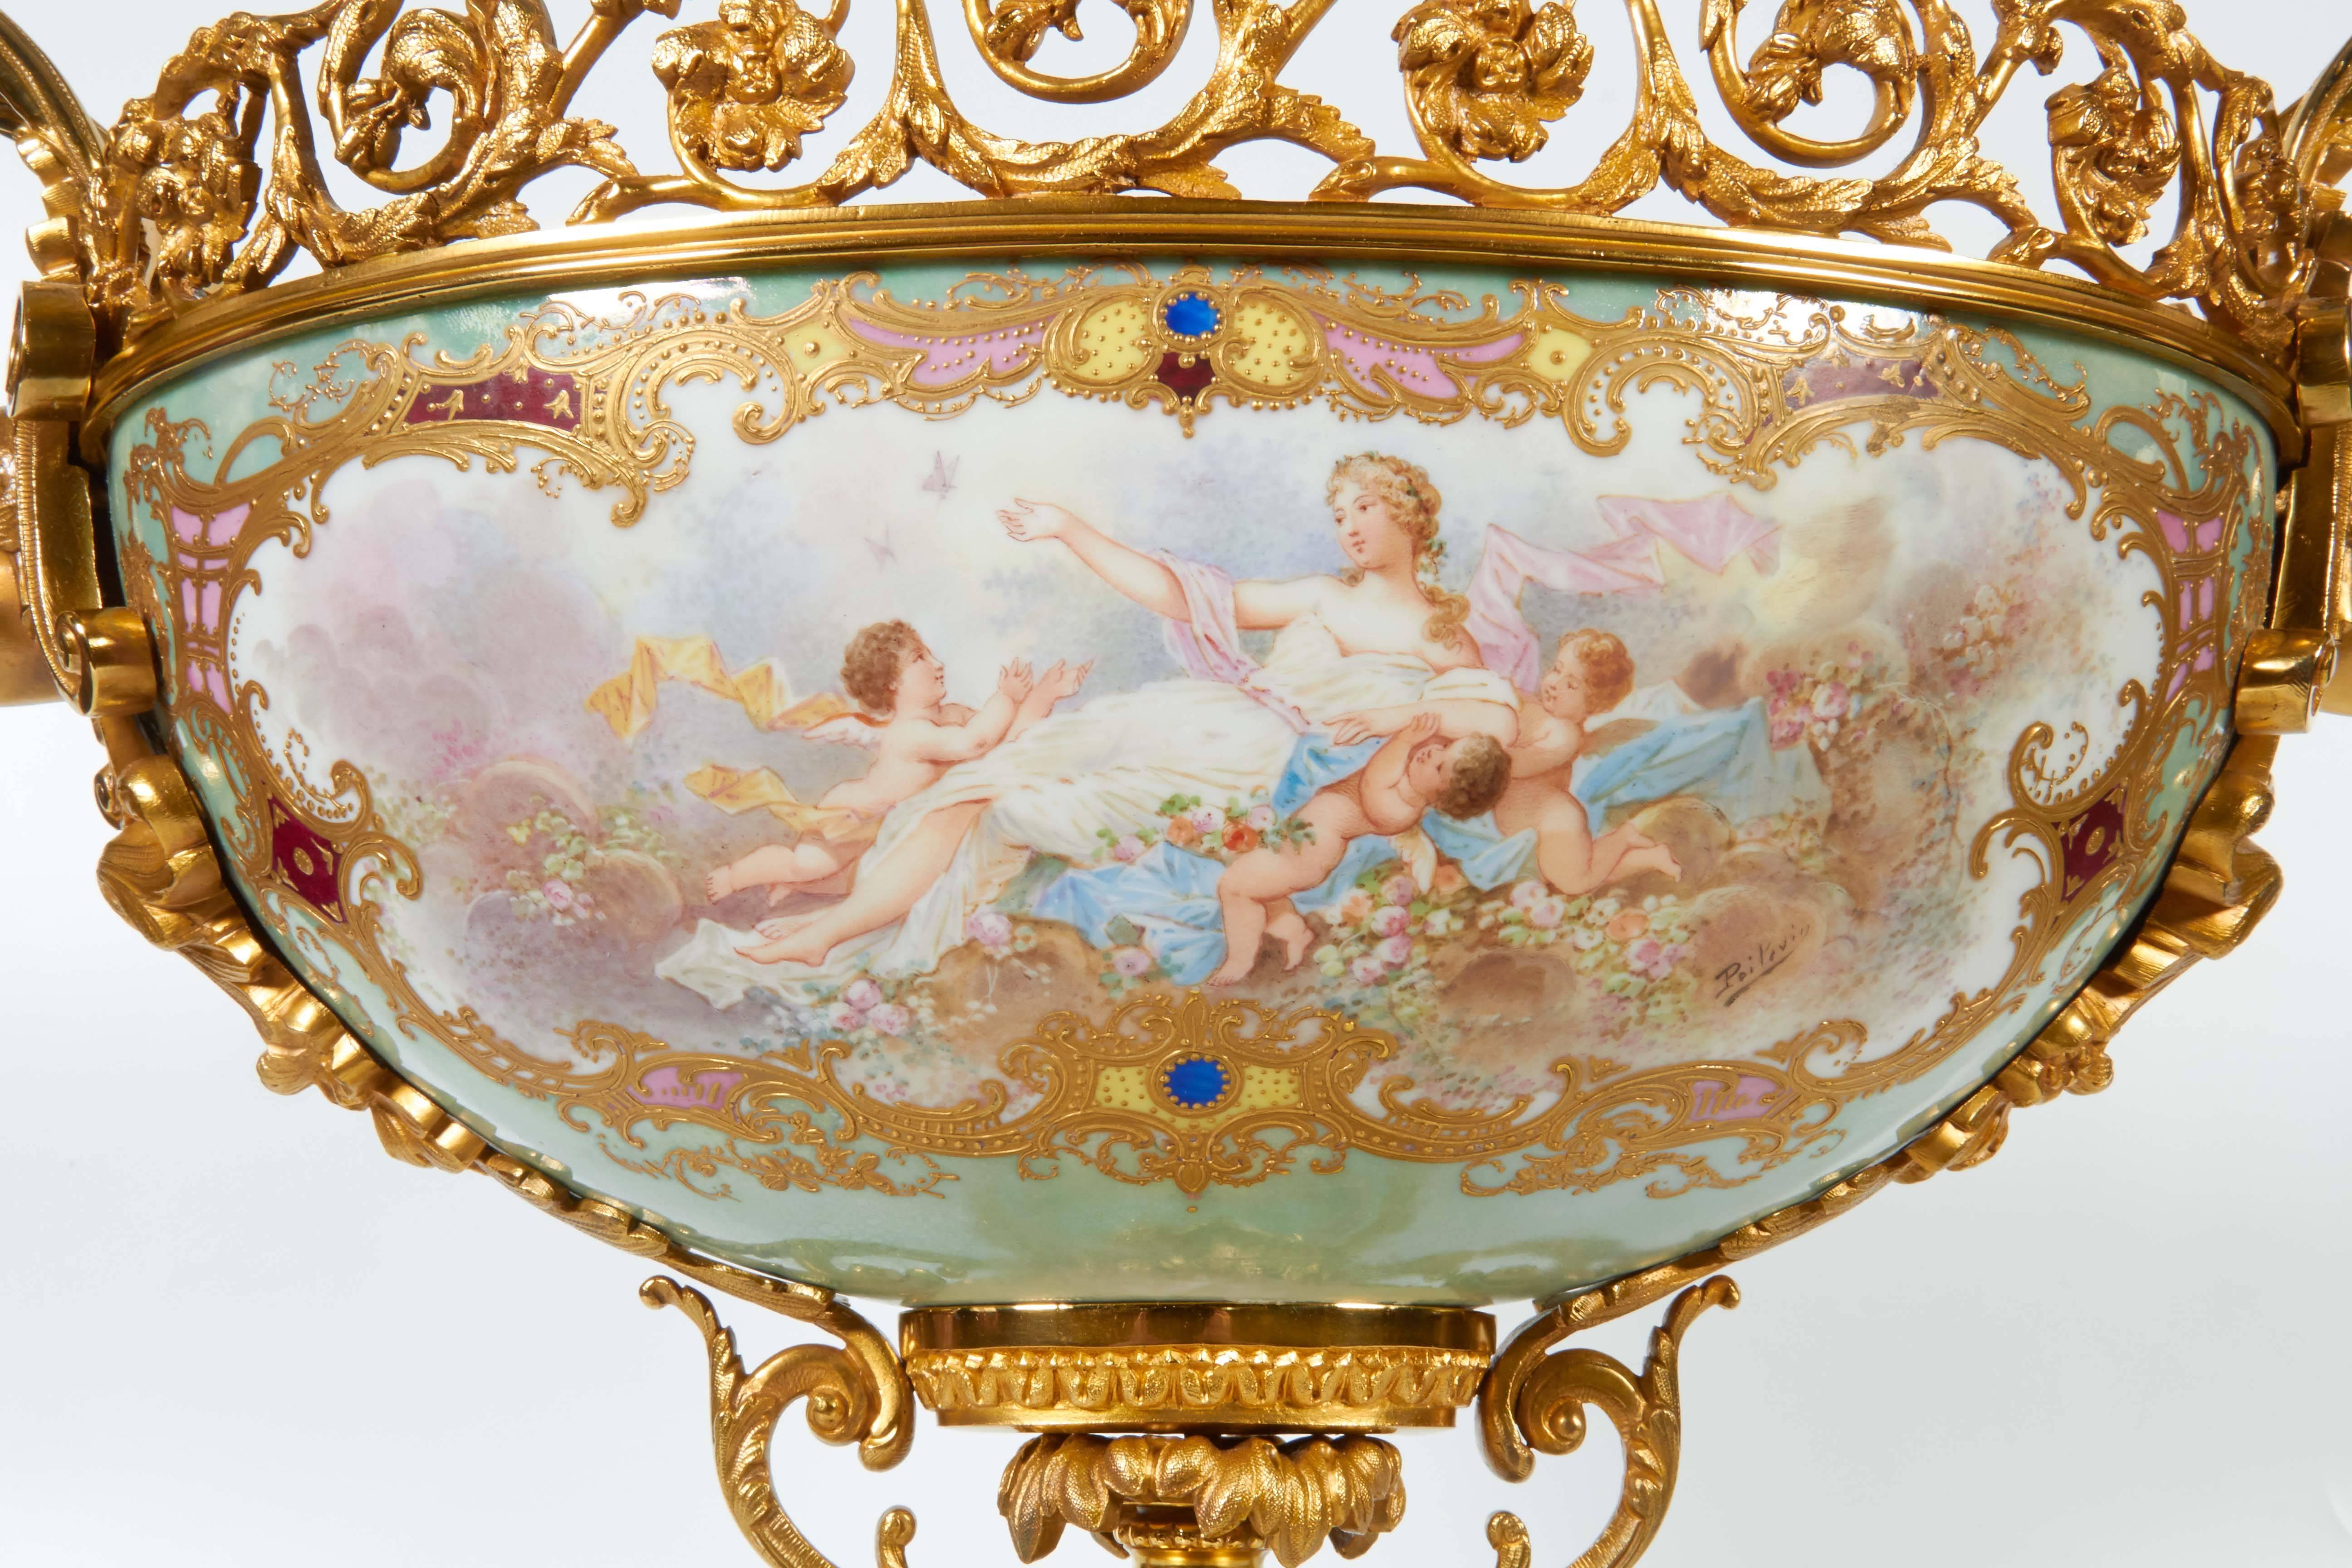 Louis XV French Sèvres Porcelain & Ormolu-Mounted Hand-Painted Oval Centerpiece/Jardenier For Sale